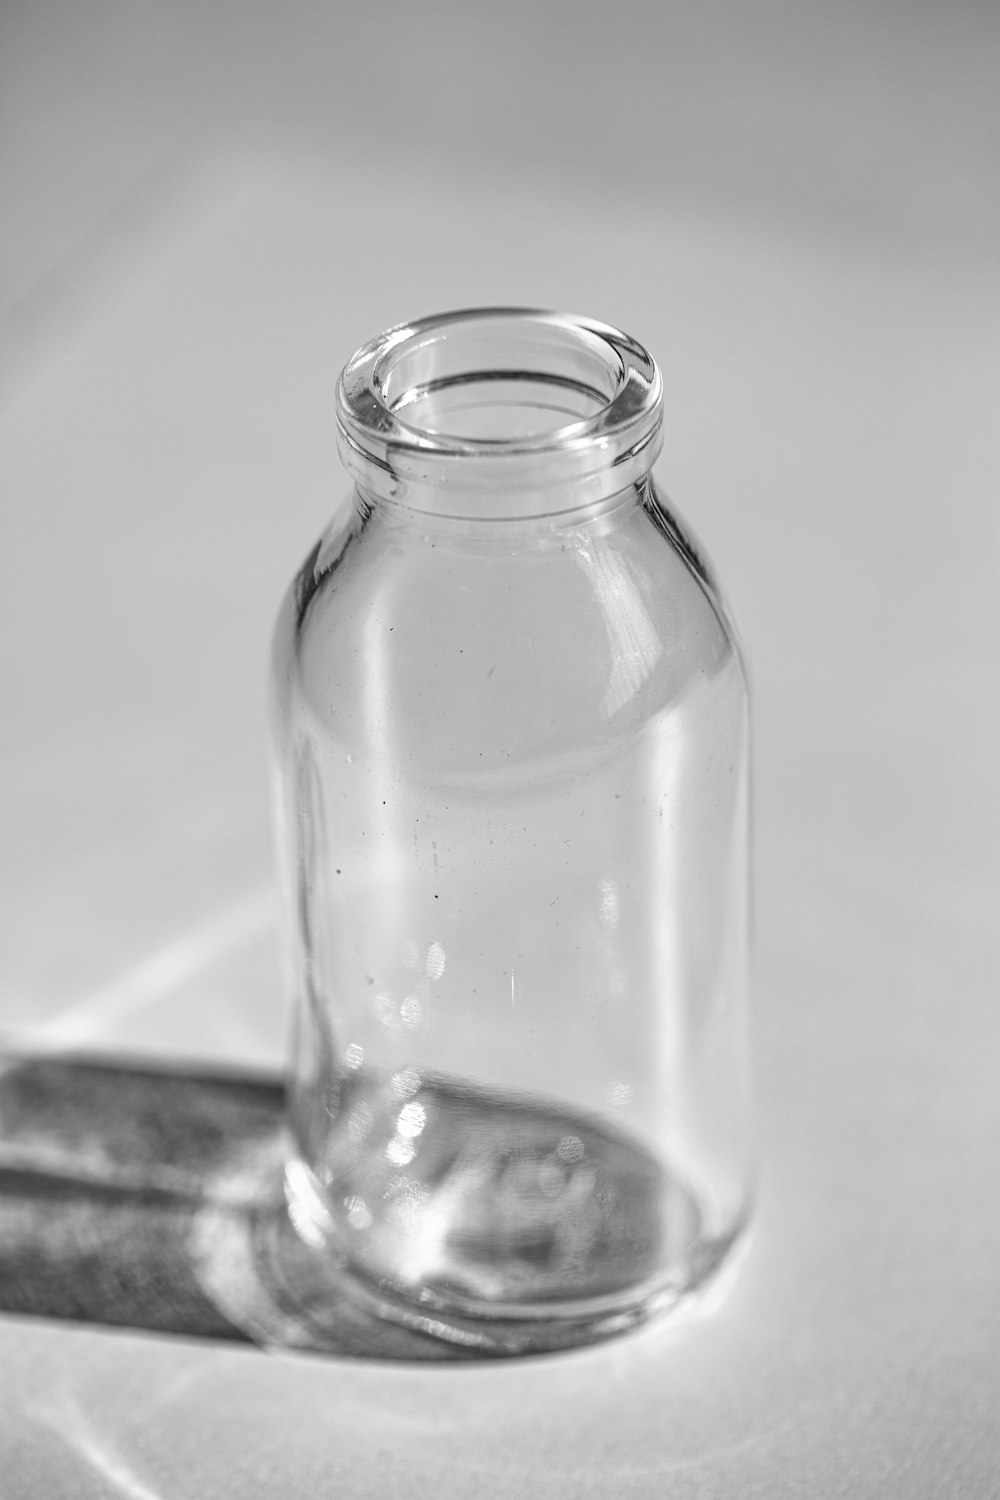 a glass jar sitting on a table next to a knife